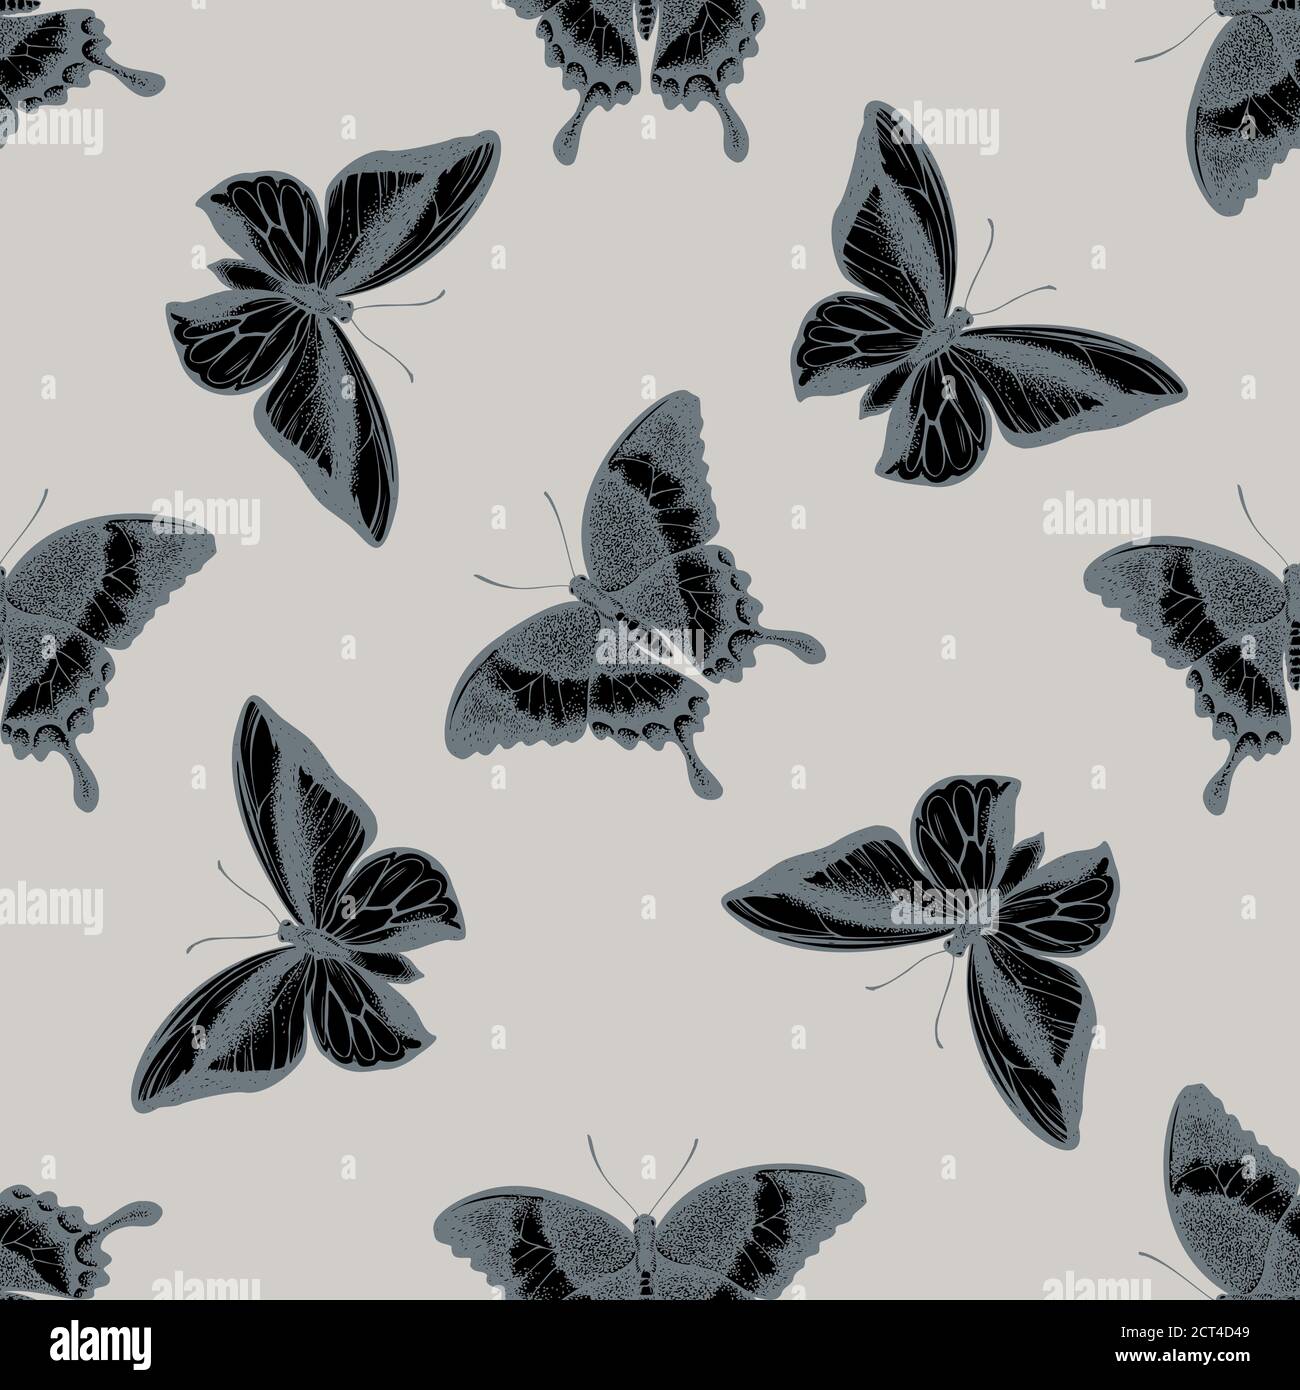 Seamless pattern with hand drawn stylized emerald swallowtail, swallowtail butterfly Stock Vector